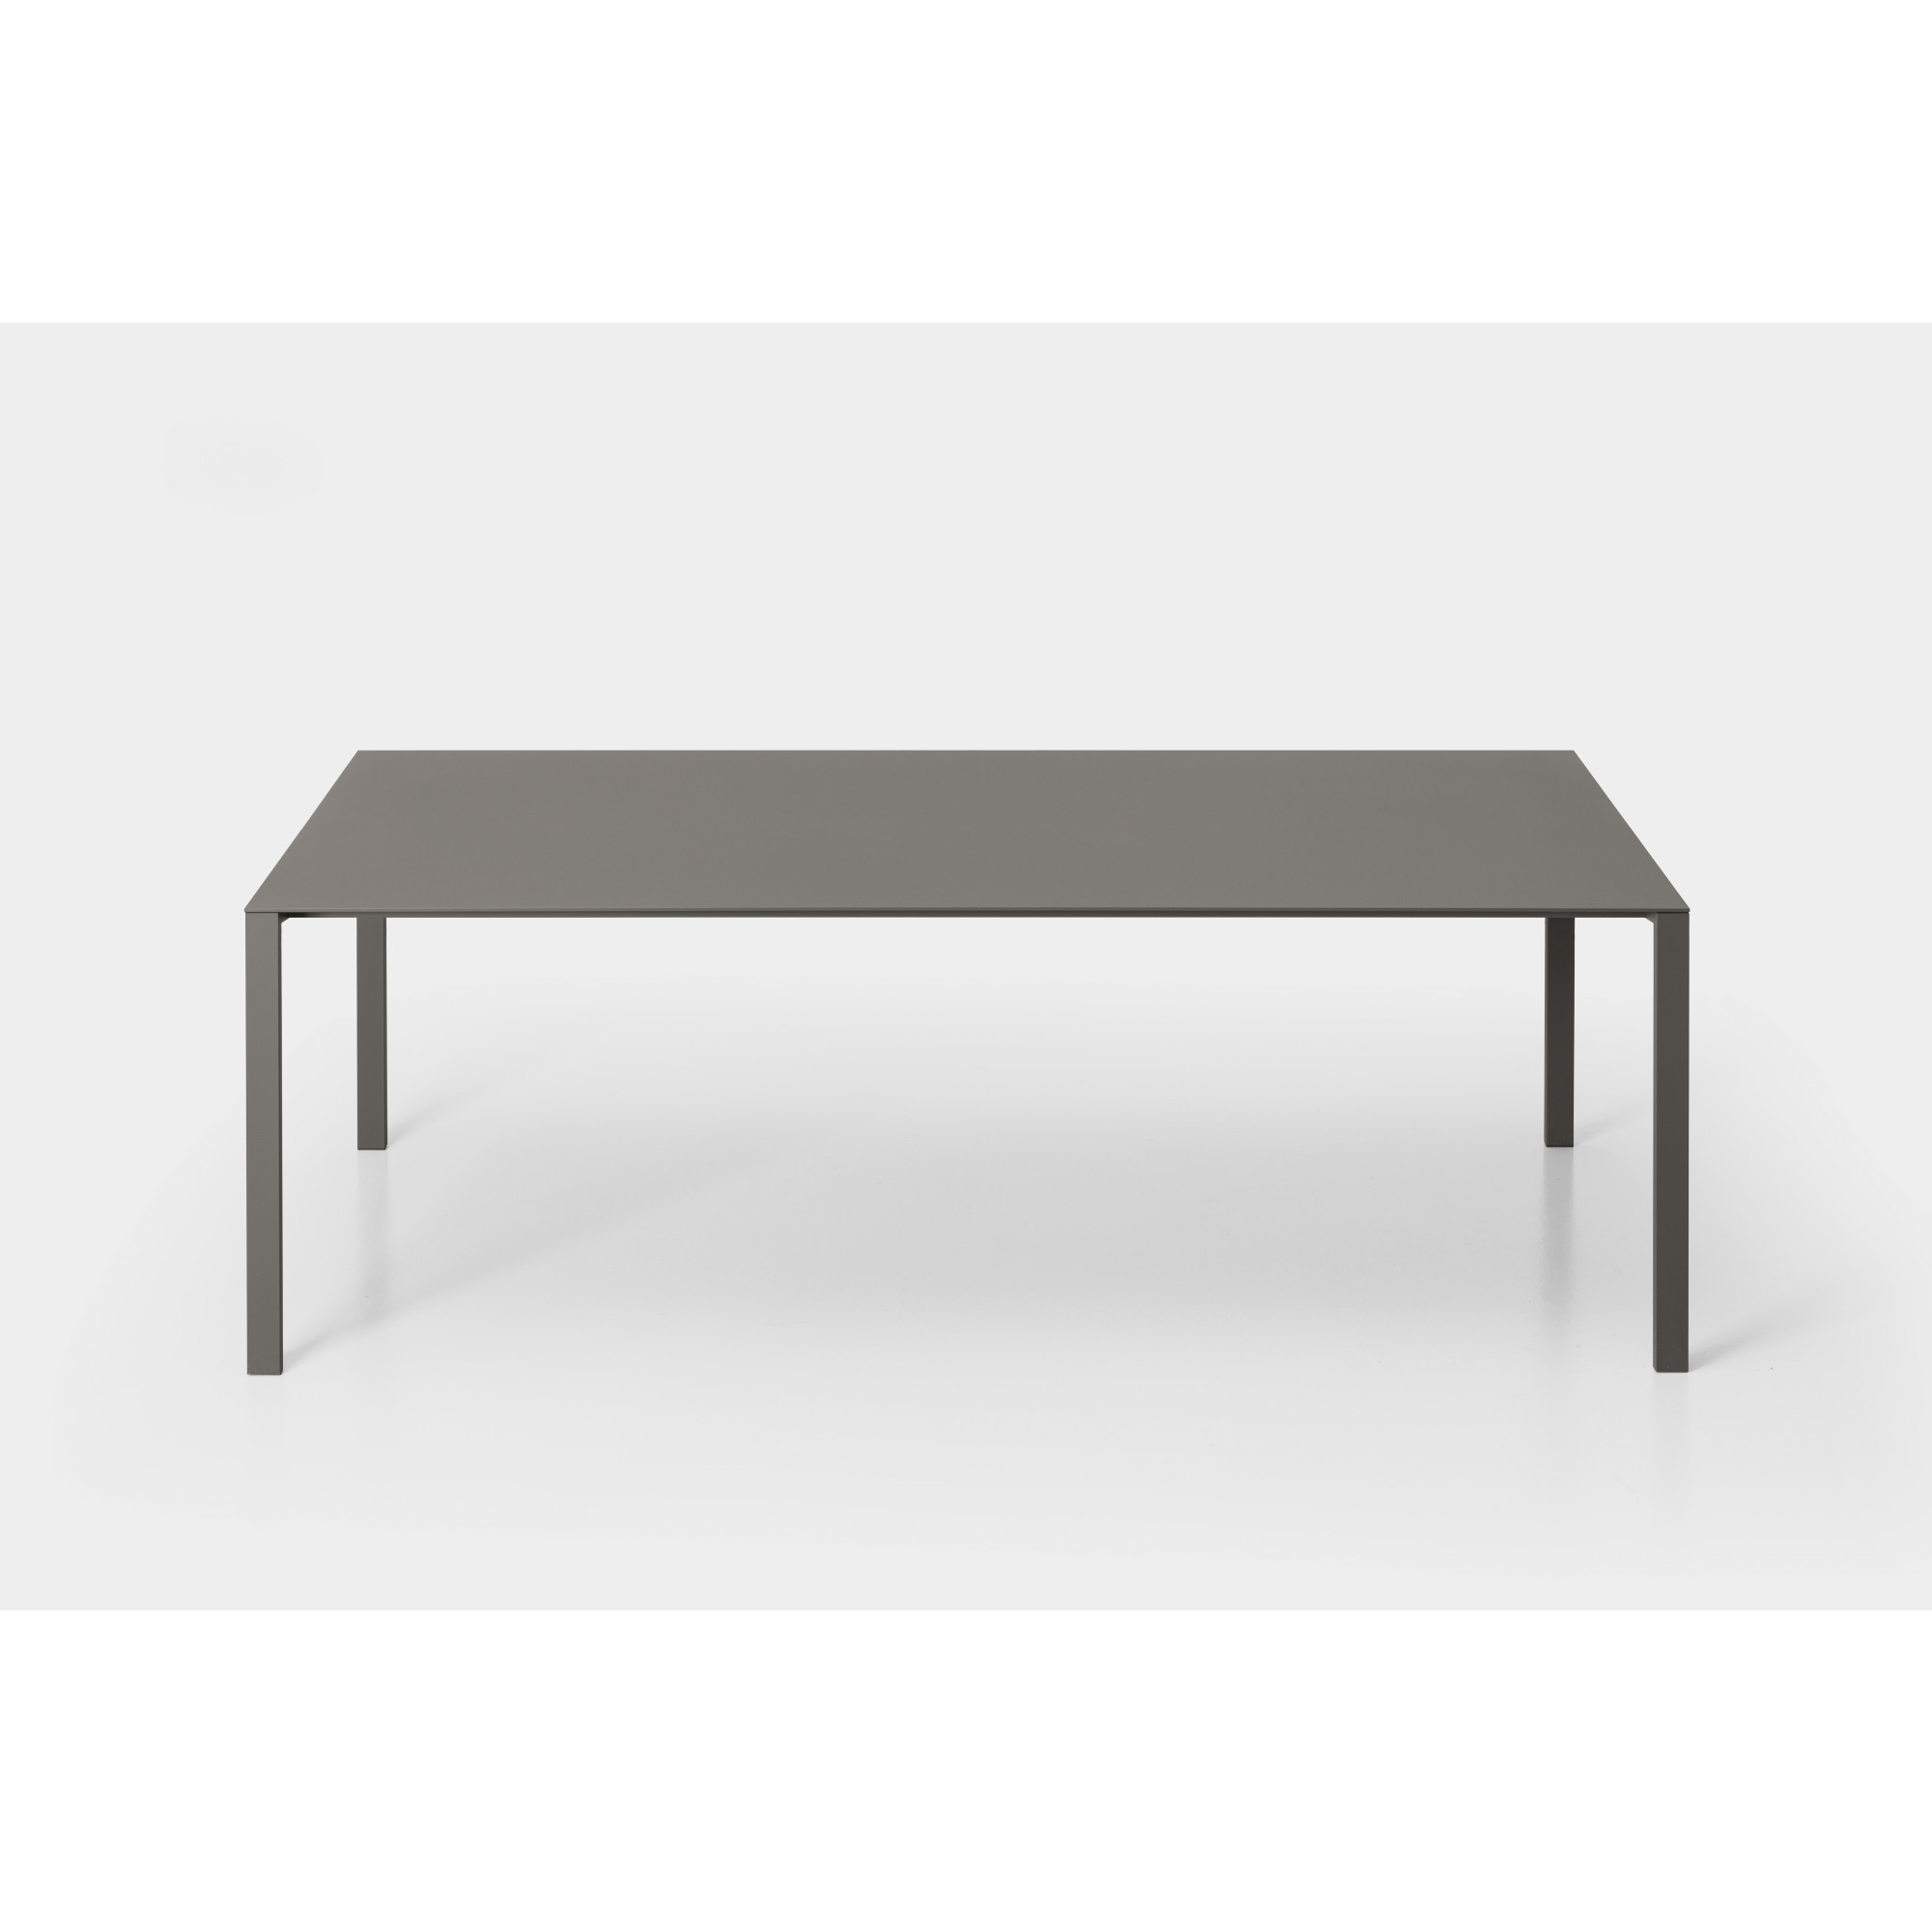 THIN-K Extending table By Kristalia